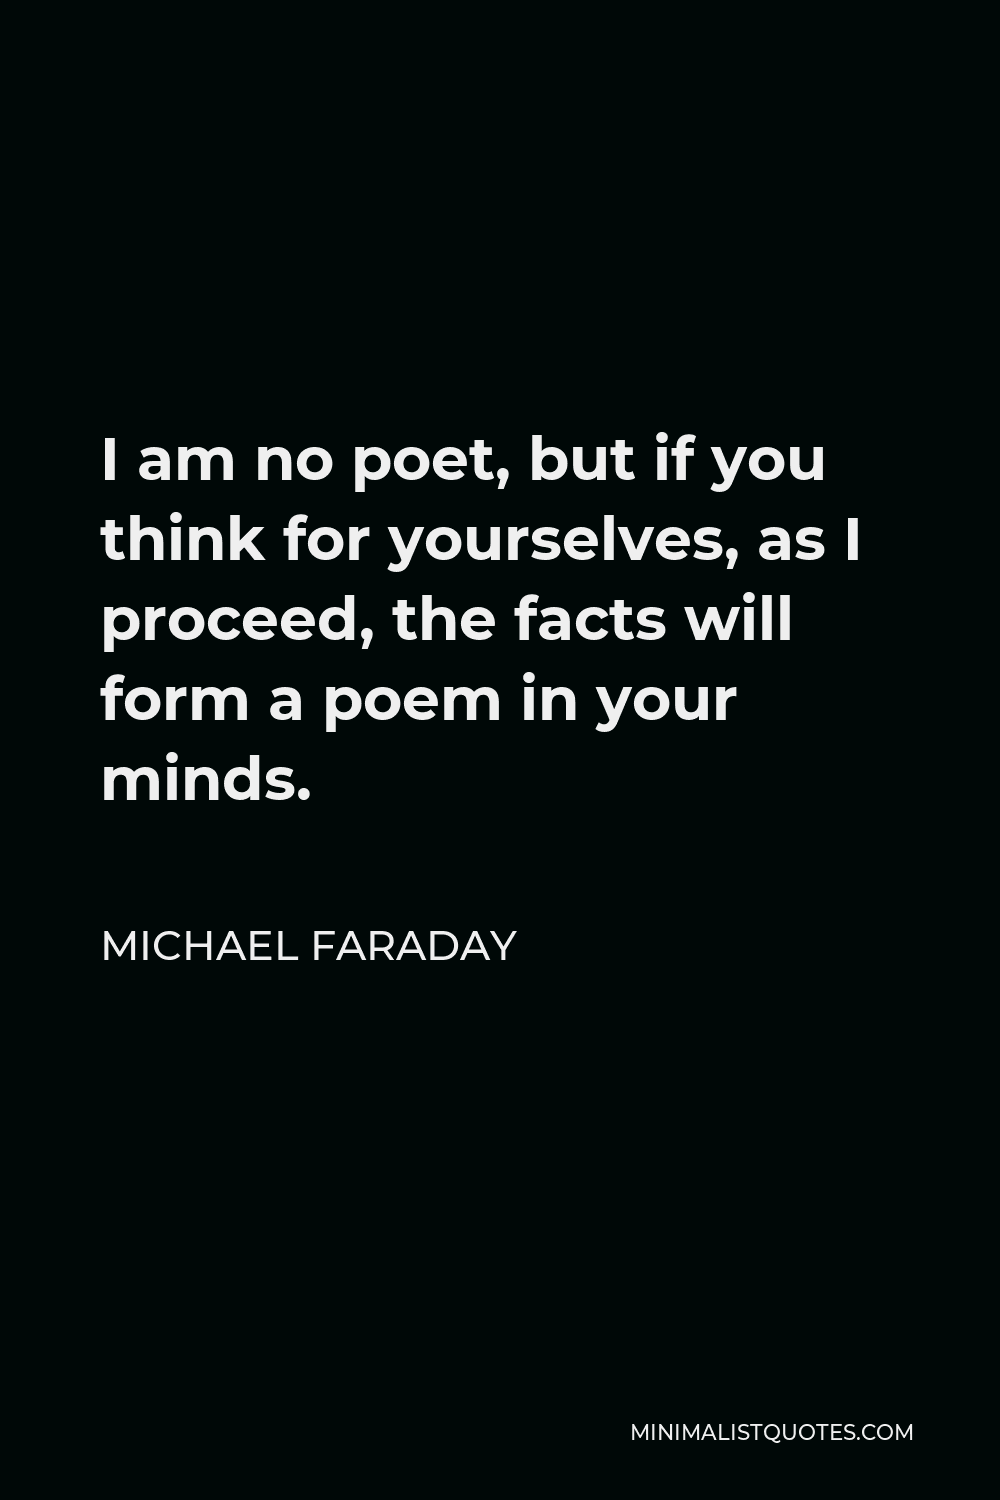 Michael Faraday Quote - I am no poet, but if you think for yourselves, as I proceed, the facts will form a poem in your minds.